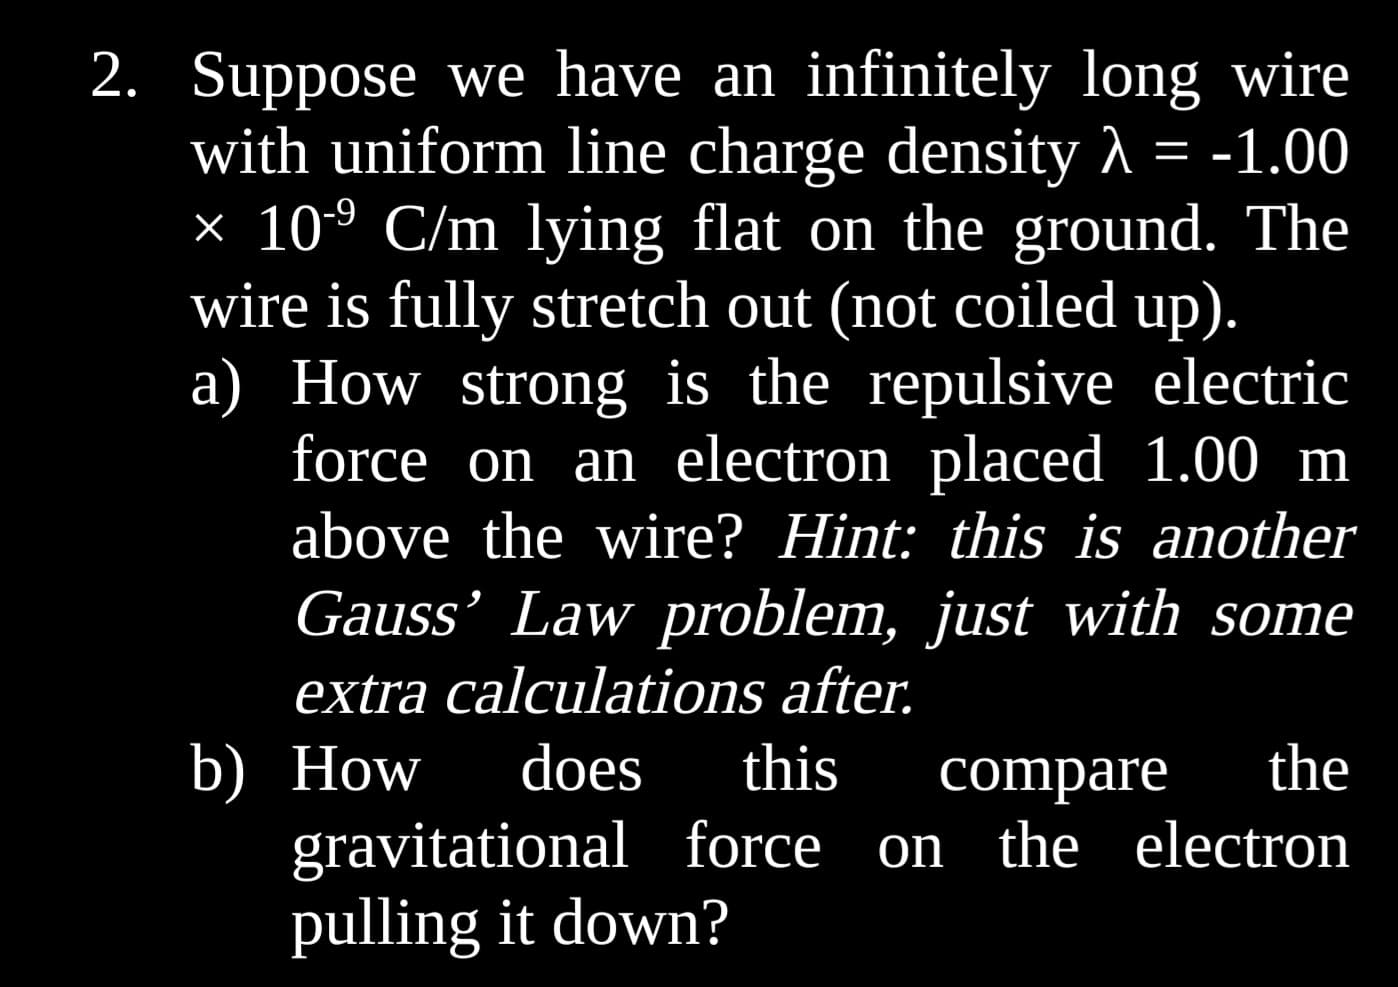 2. Suppose we have an infinitely long wire
with uniform line charge density λ = -1.00
× 10-⁹ C/m lying flat on the ground. The
wire is fully stretch out (not coiled up).
a) How strong is the repulsive electric
force on an electron placed 1.00 m
above the wire? Hint: this is another
Gauss' Law problem, just with some
extra calculations after.
b) How does this compare the
gravitational force on the electron
pulling it down?